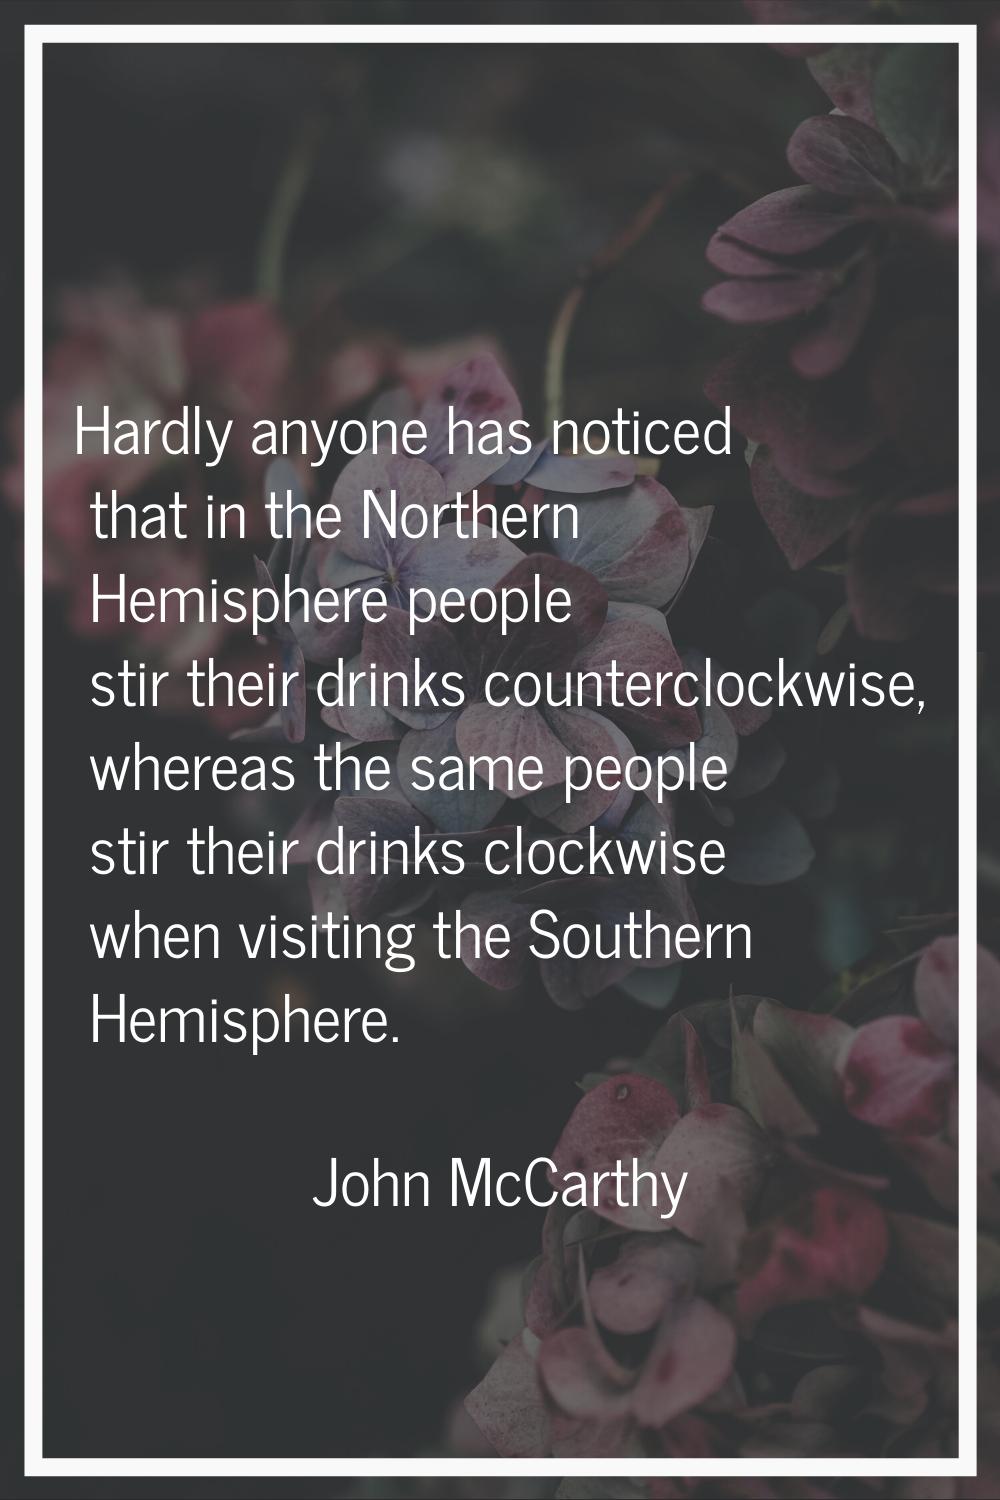 Hardly anyone has noticed that in the Northern Hemisphere people stir their drinks counterclockwise